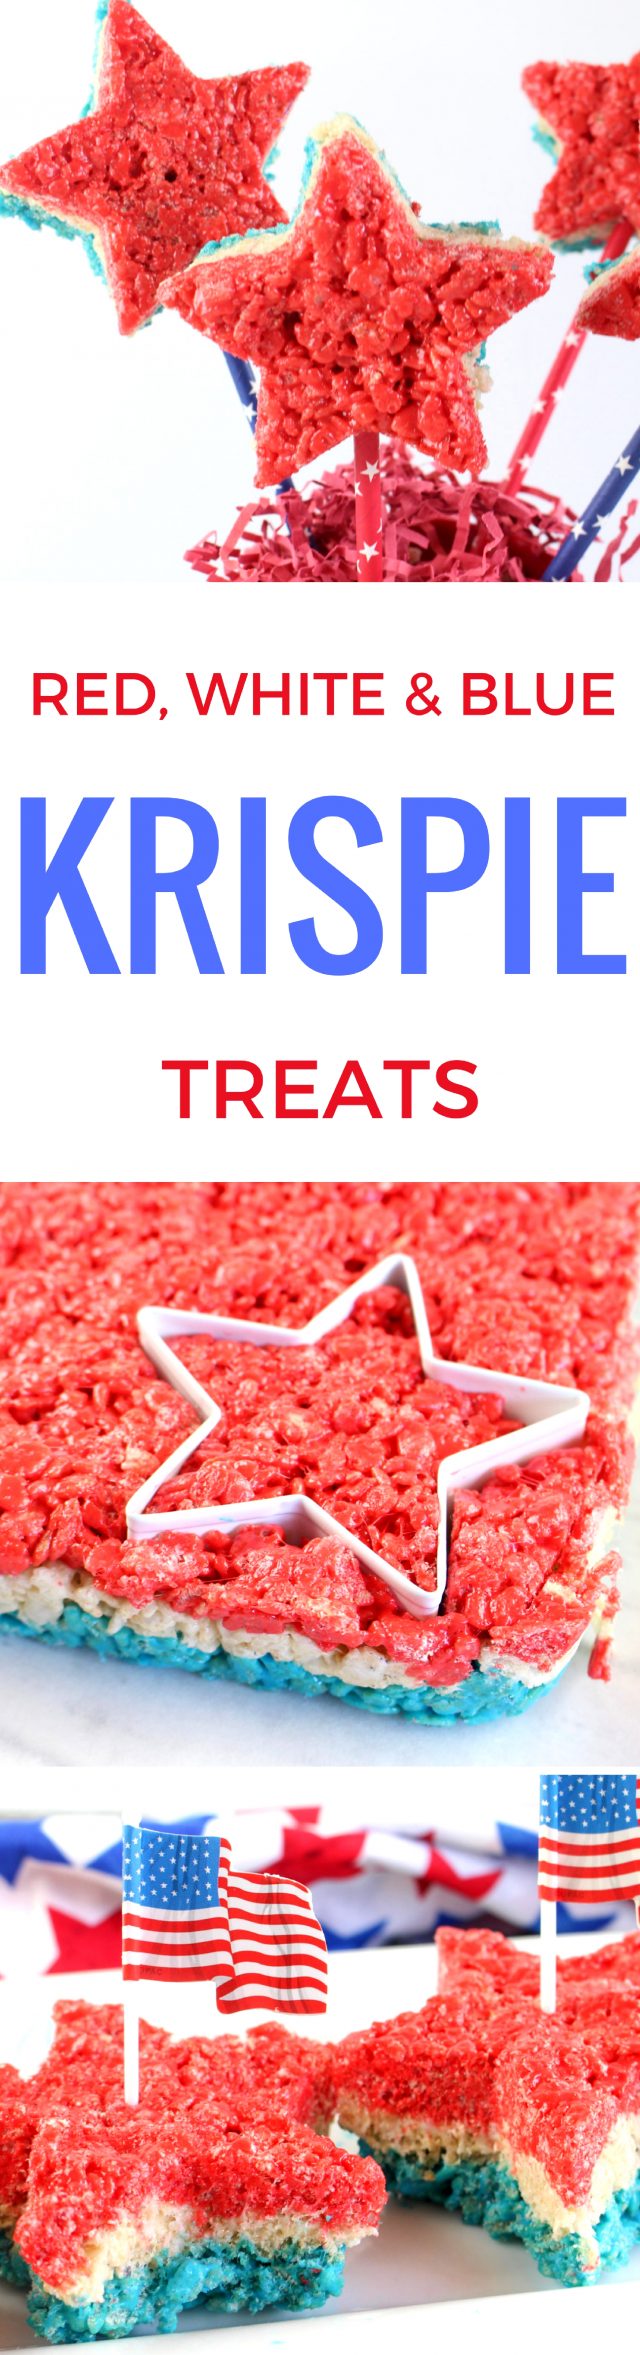 Red, White & Blue Rice Krispie Stars Recipe for Memorial Day or July 4th